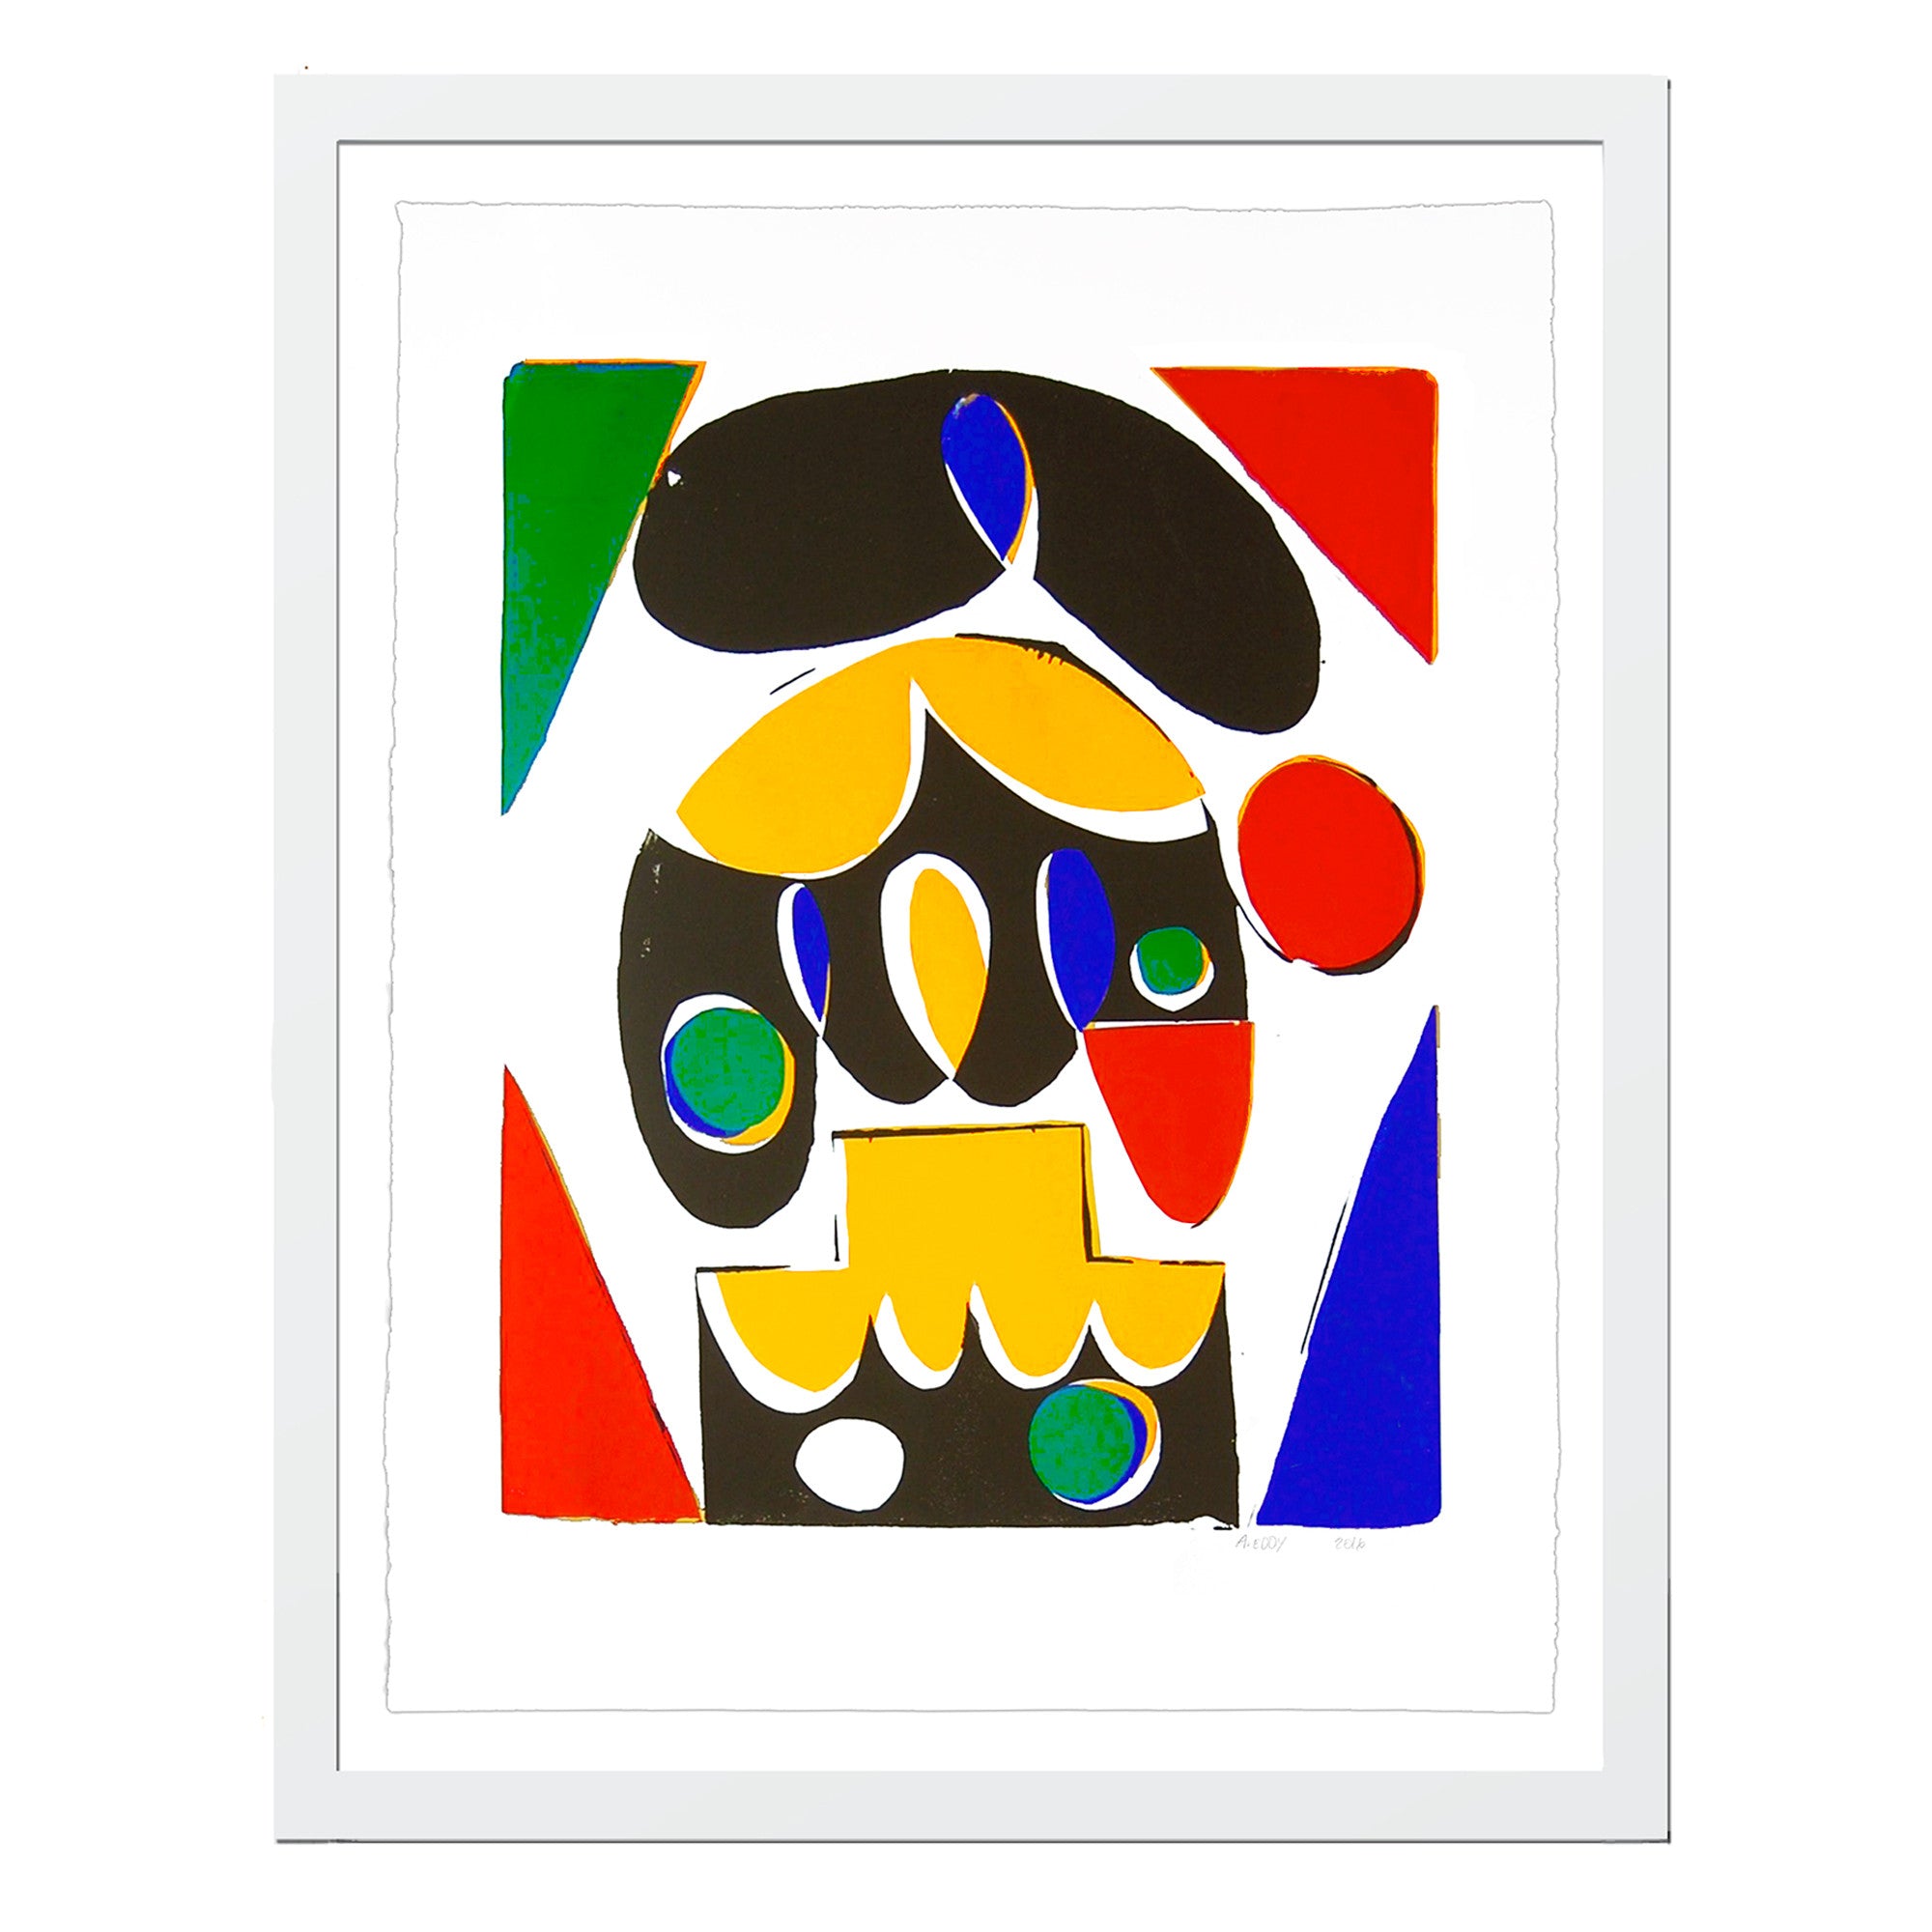 Flying-Fingers, City-Face (Yellow, Red, Blue, Green, Black)